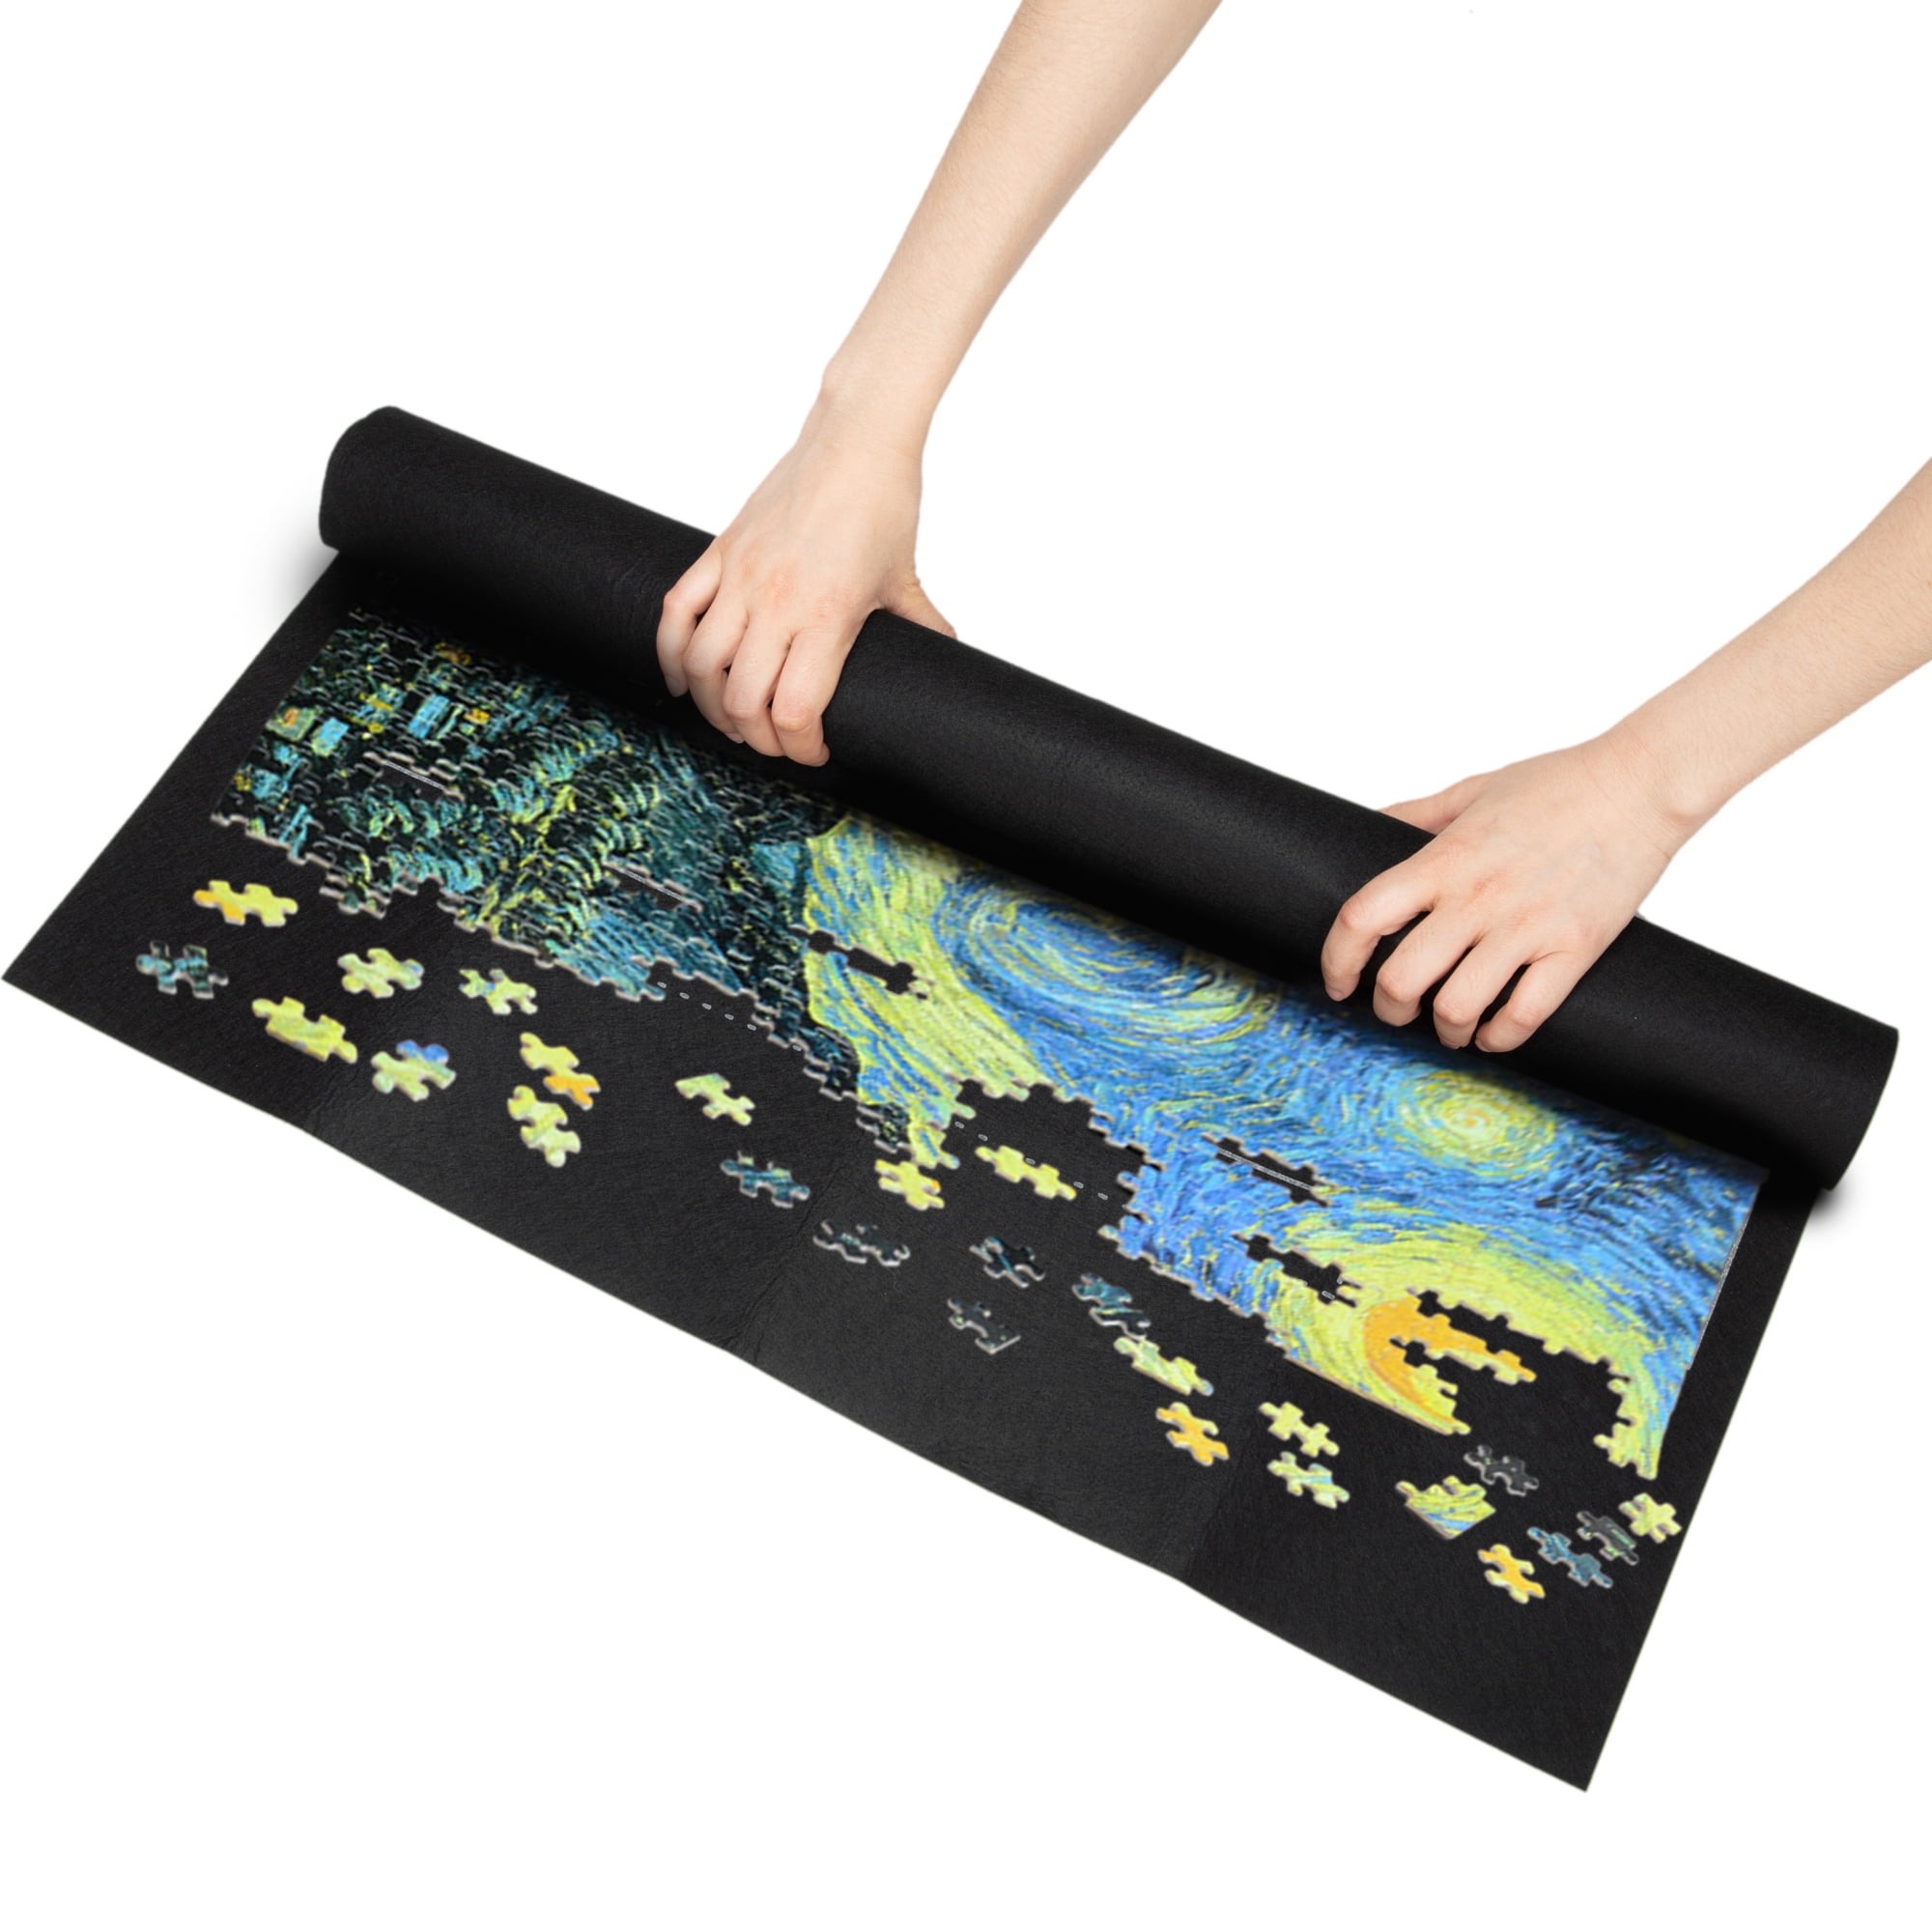 Details about   Jigsaw Puzzle Mat Felt Roll Storage up to 1500 Pieces Kids Adults Portable Tool 